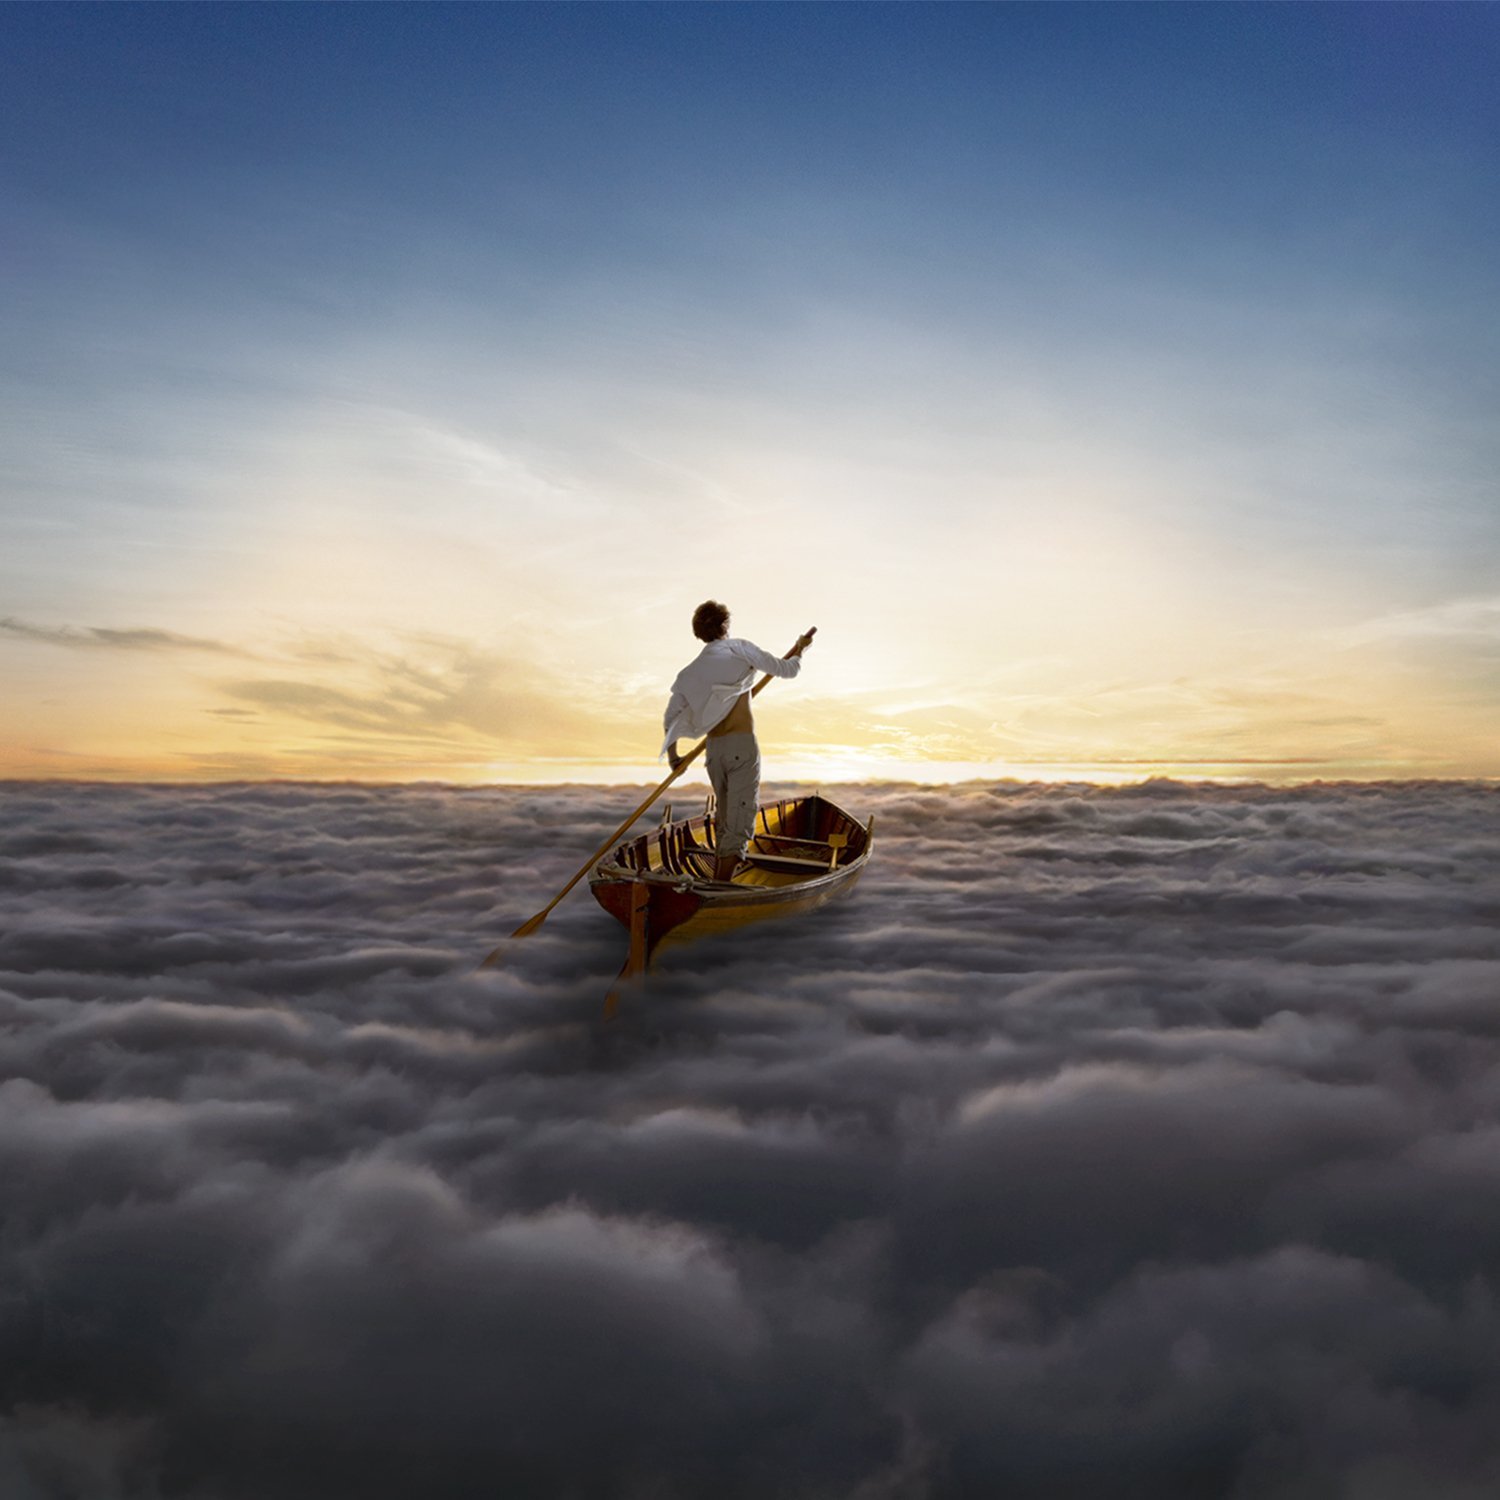 The Endless River is a return to the creative principles that informed the writing process that produced Pink Floyd classics like Echoes, Shine On You Crazy Diamond and Animals. In 1993, there was talk of a separate album from the non-vocal tracks not issued on "The Division Bell", but the idea was dropped. The music is finally being released!!